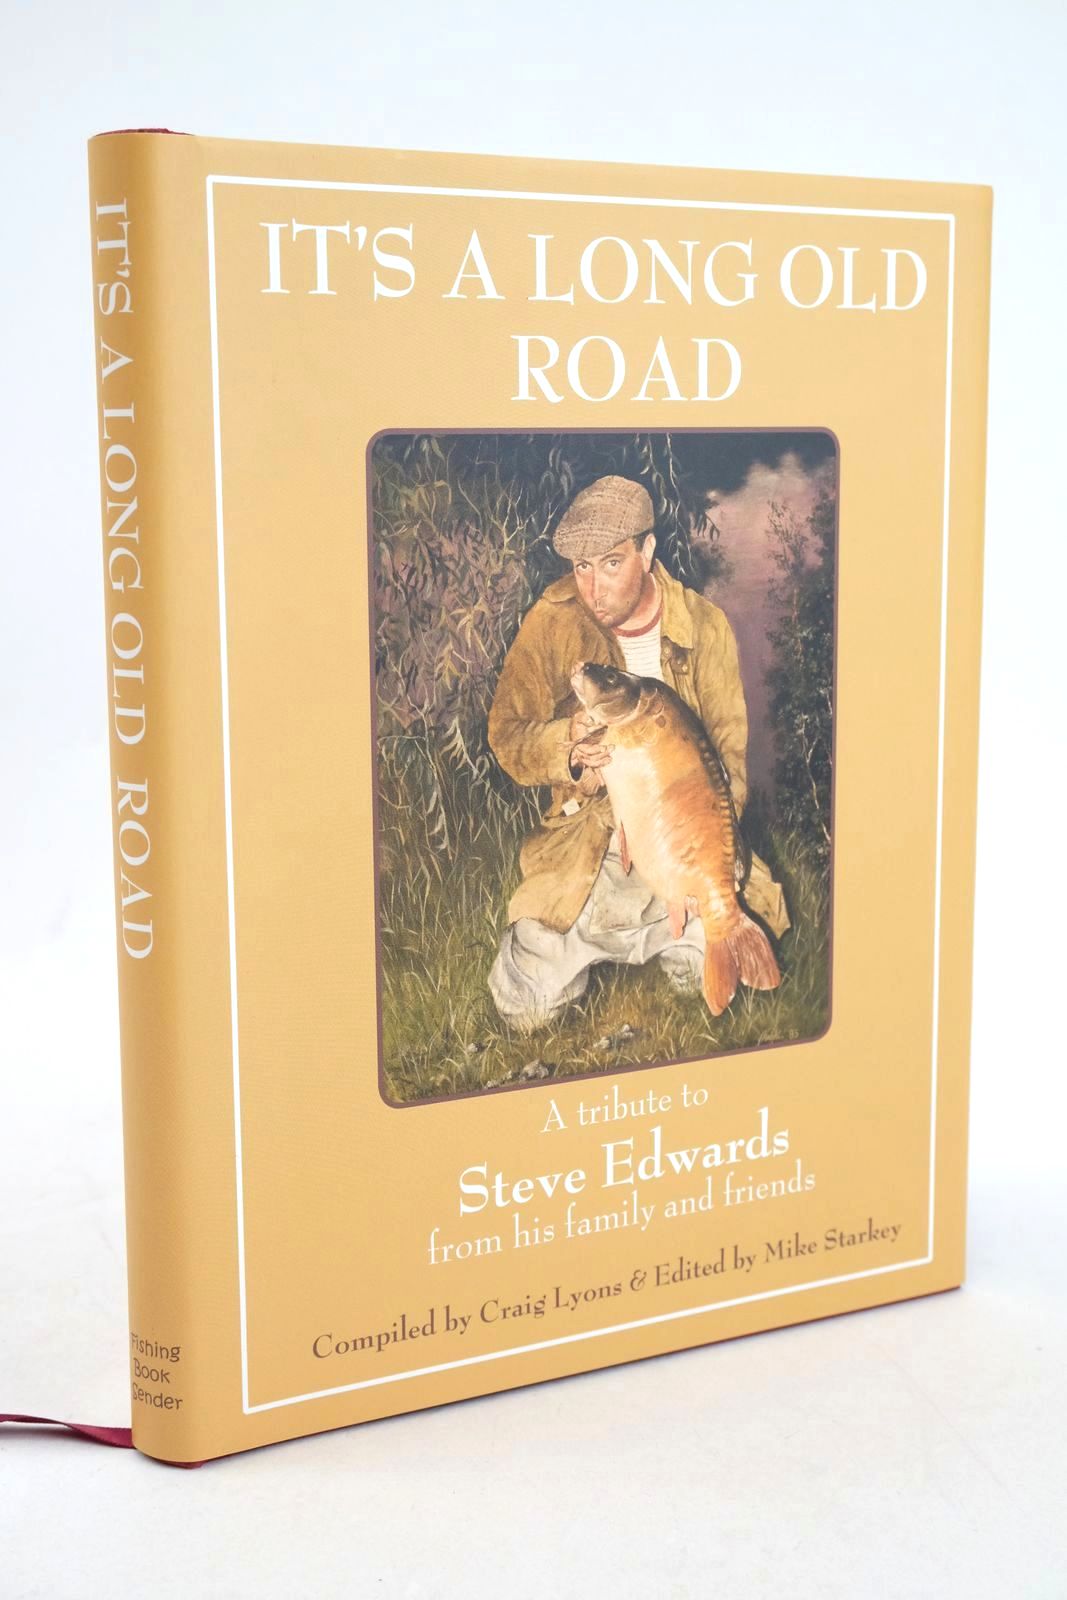 Photo of IT'S A LONG OLD ROAD written by Lyons, Craig Starkey, Mike published by FishingBookSender (STOCK CODE: 1327647)  for sale by Stella & Rose's Books